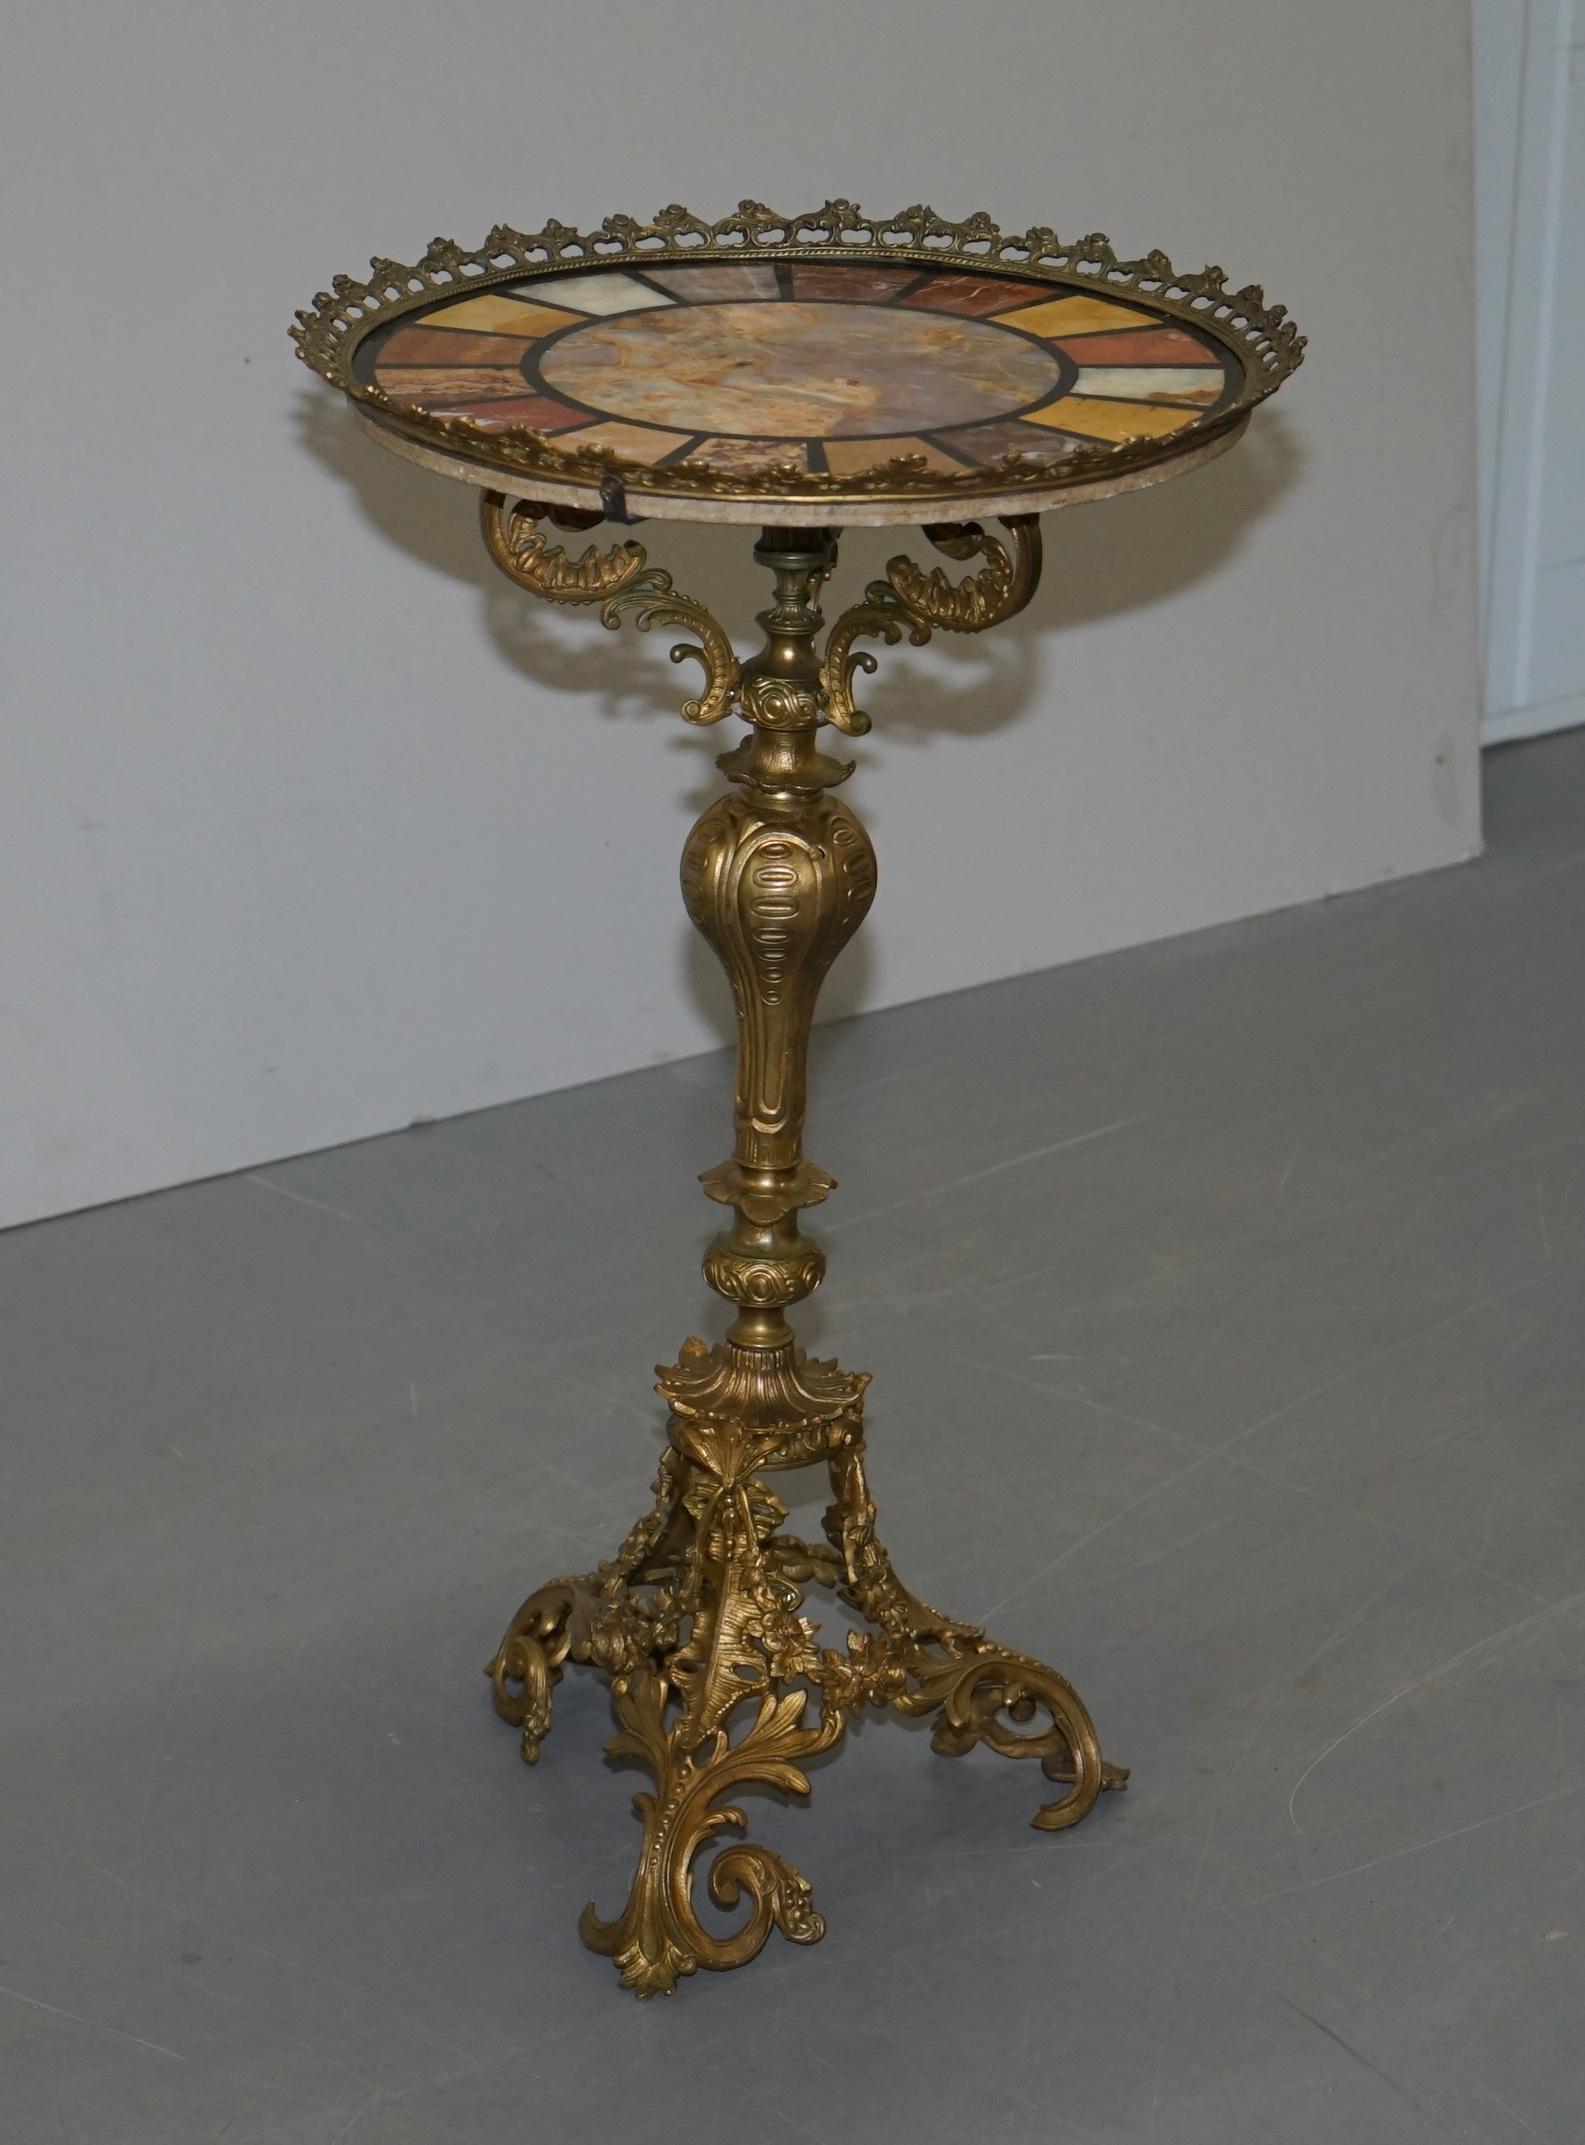 Hand-Crafted Rare circa 1820 Regency Ornately Cast Italian Brass Side Table Speciamine Marble For Sale